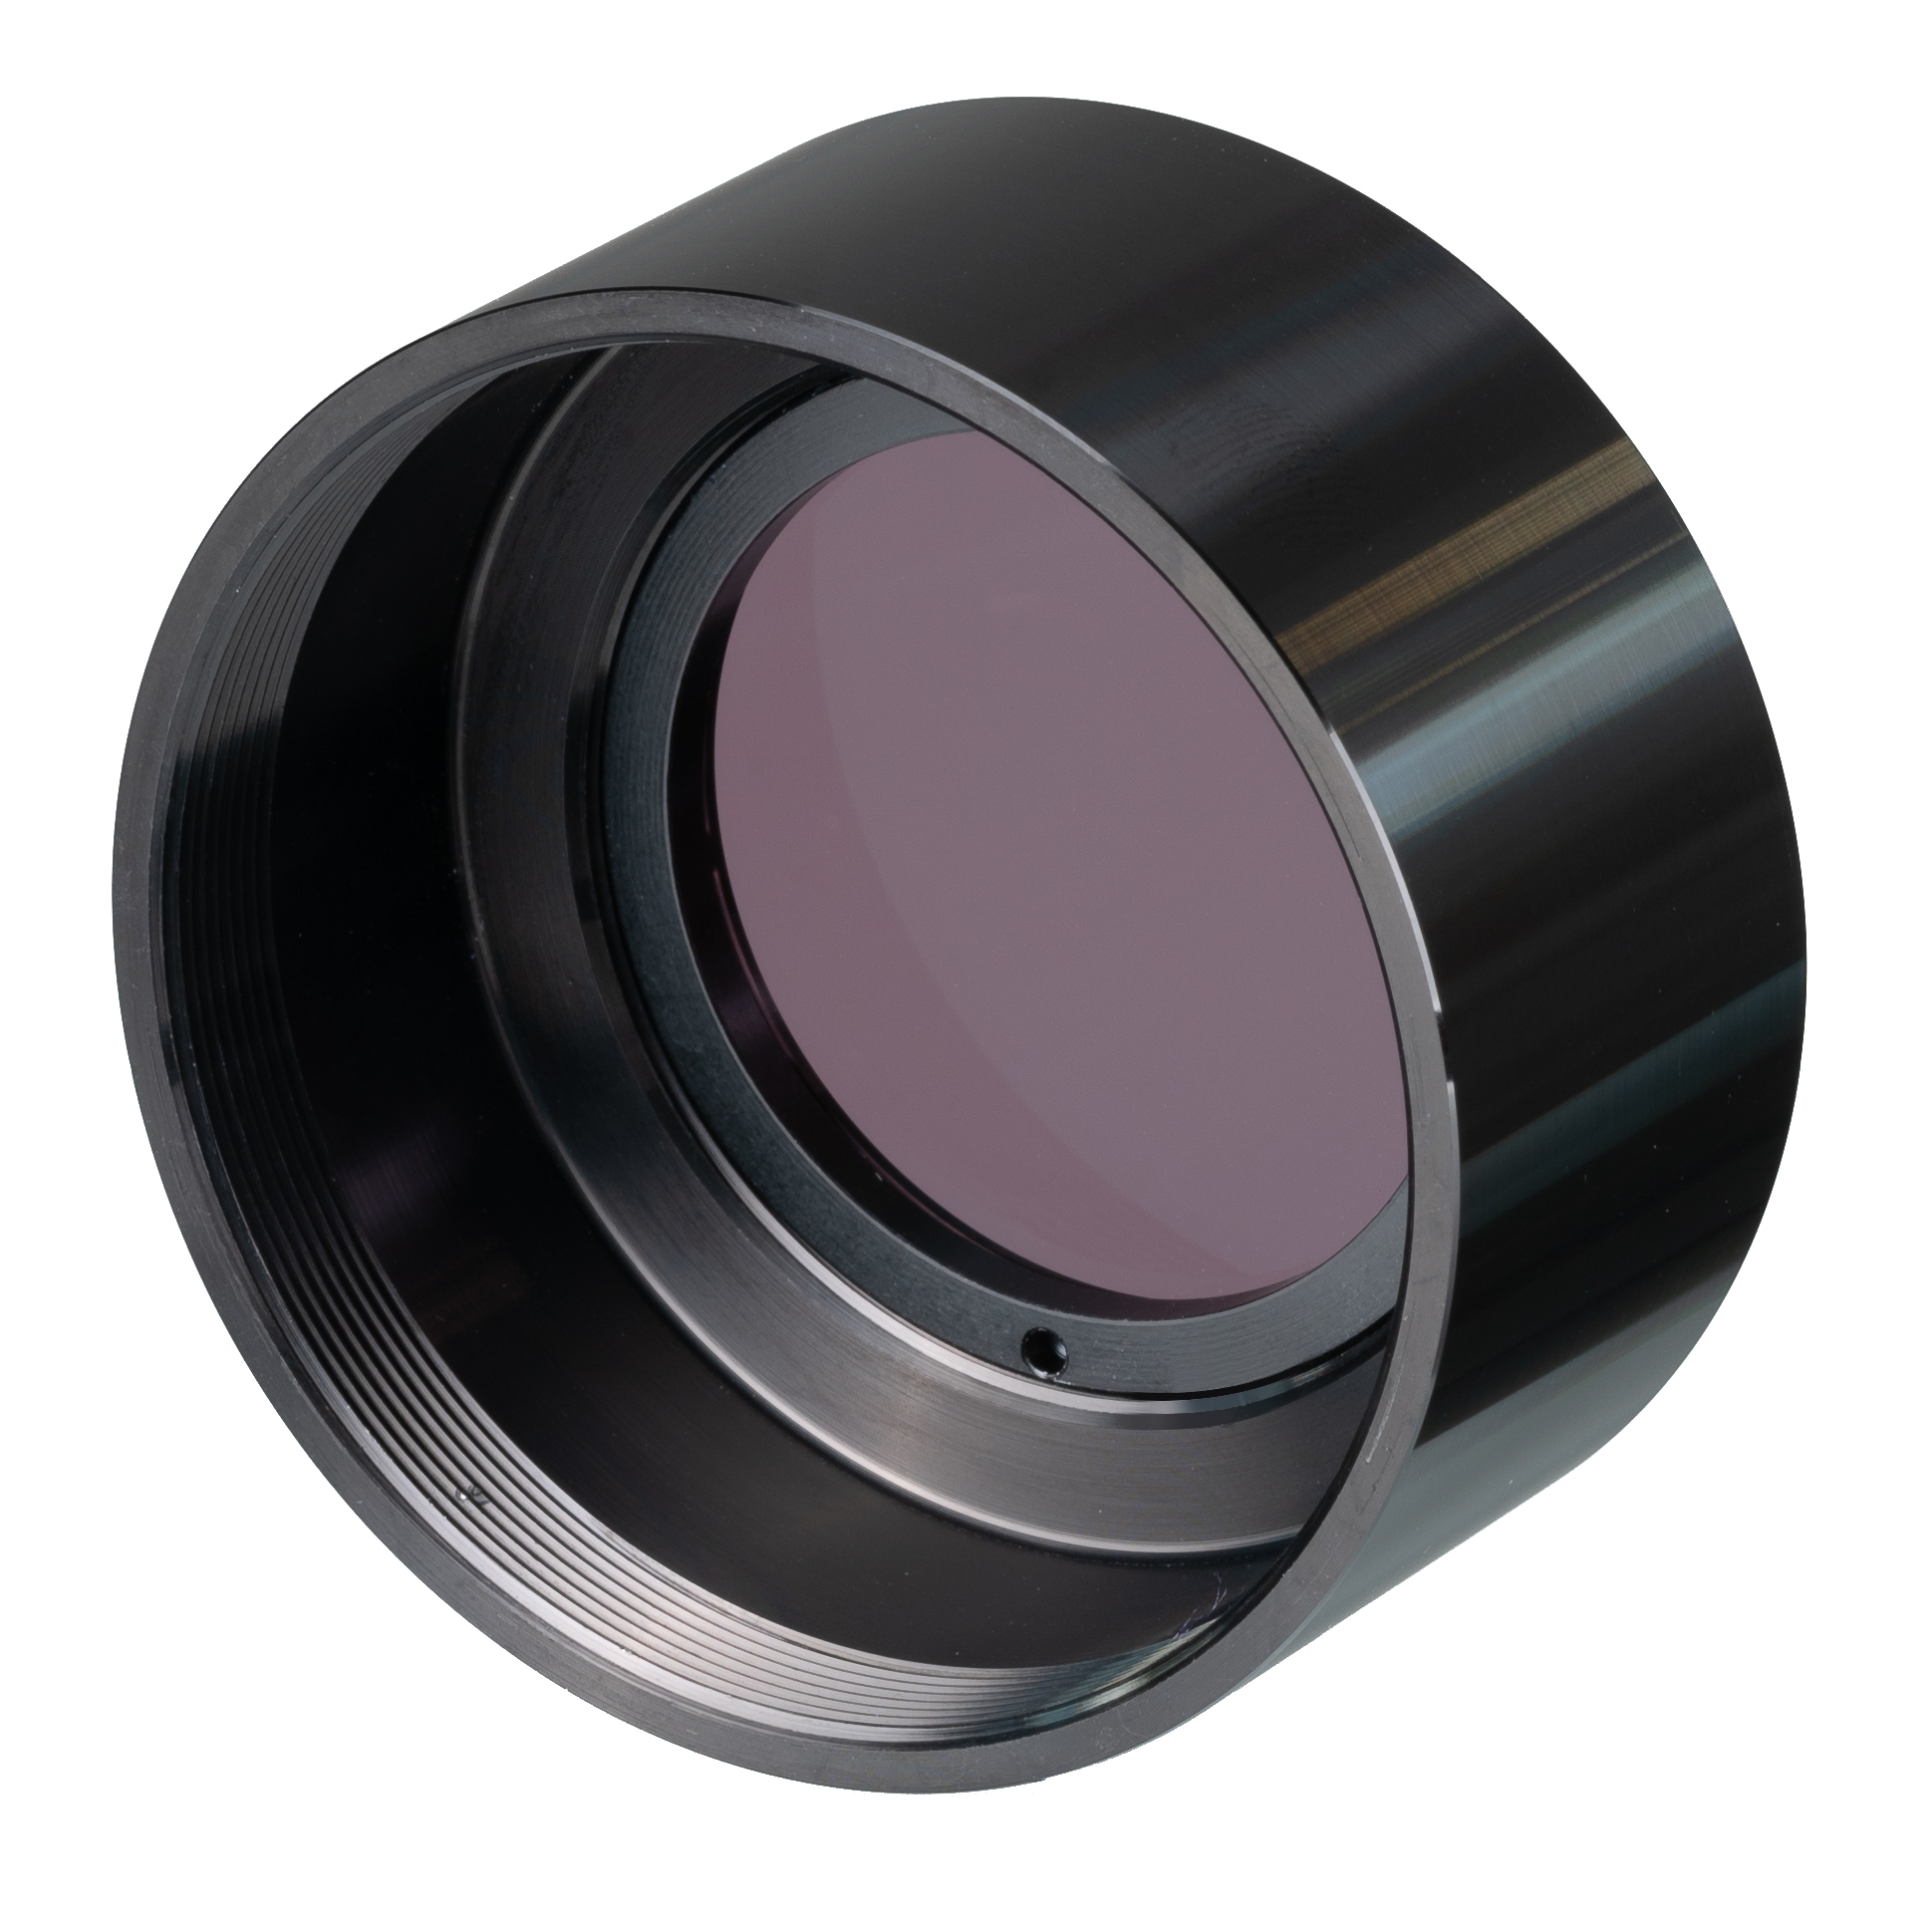 LUNT HRG/SFPT anti-reflection filter for DSII/SFPT double-stack at LS80MT & LS100MT telescopes